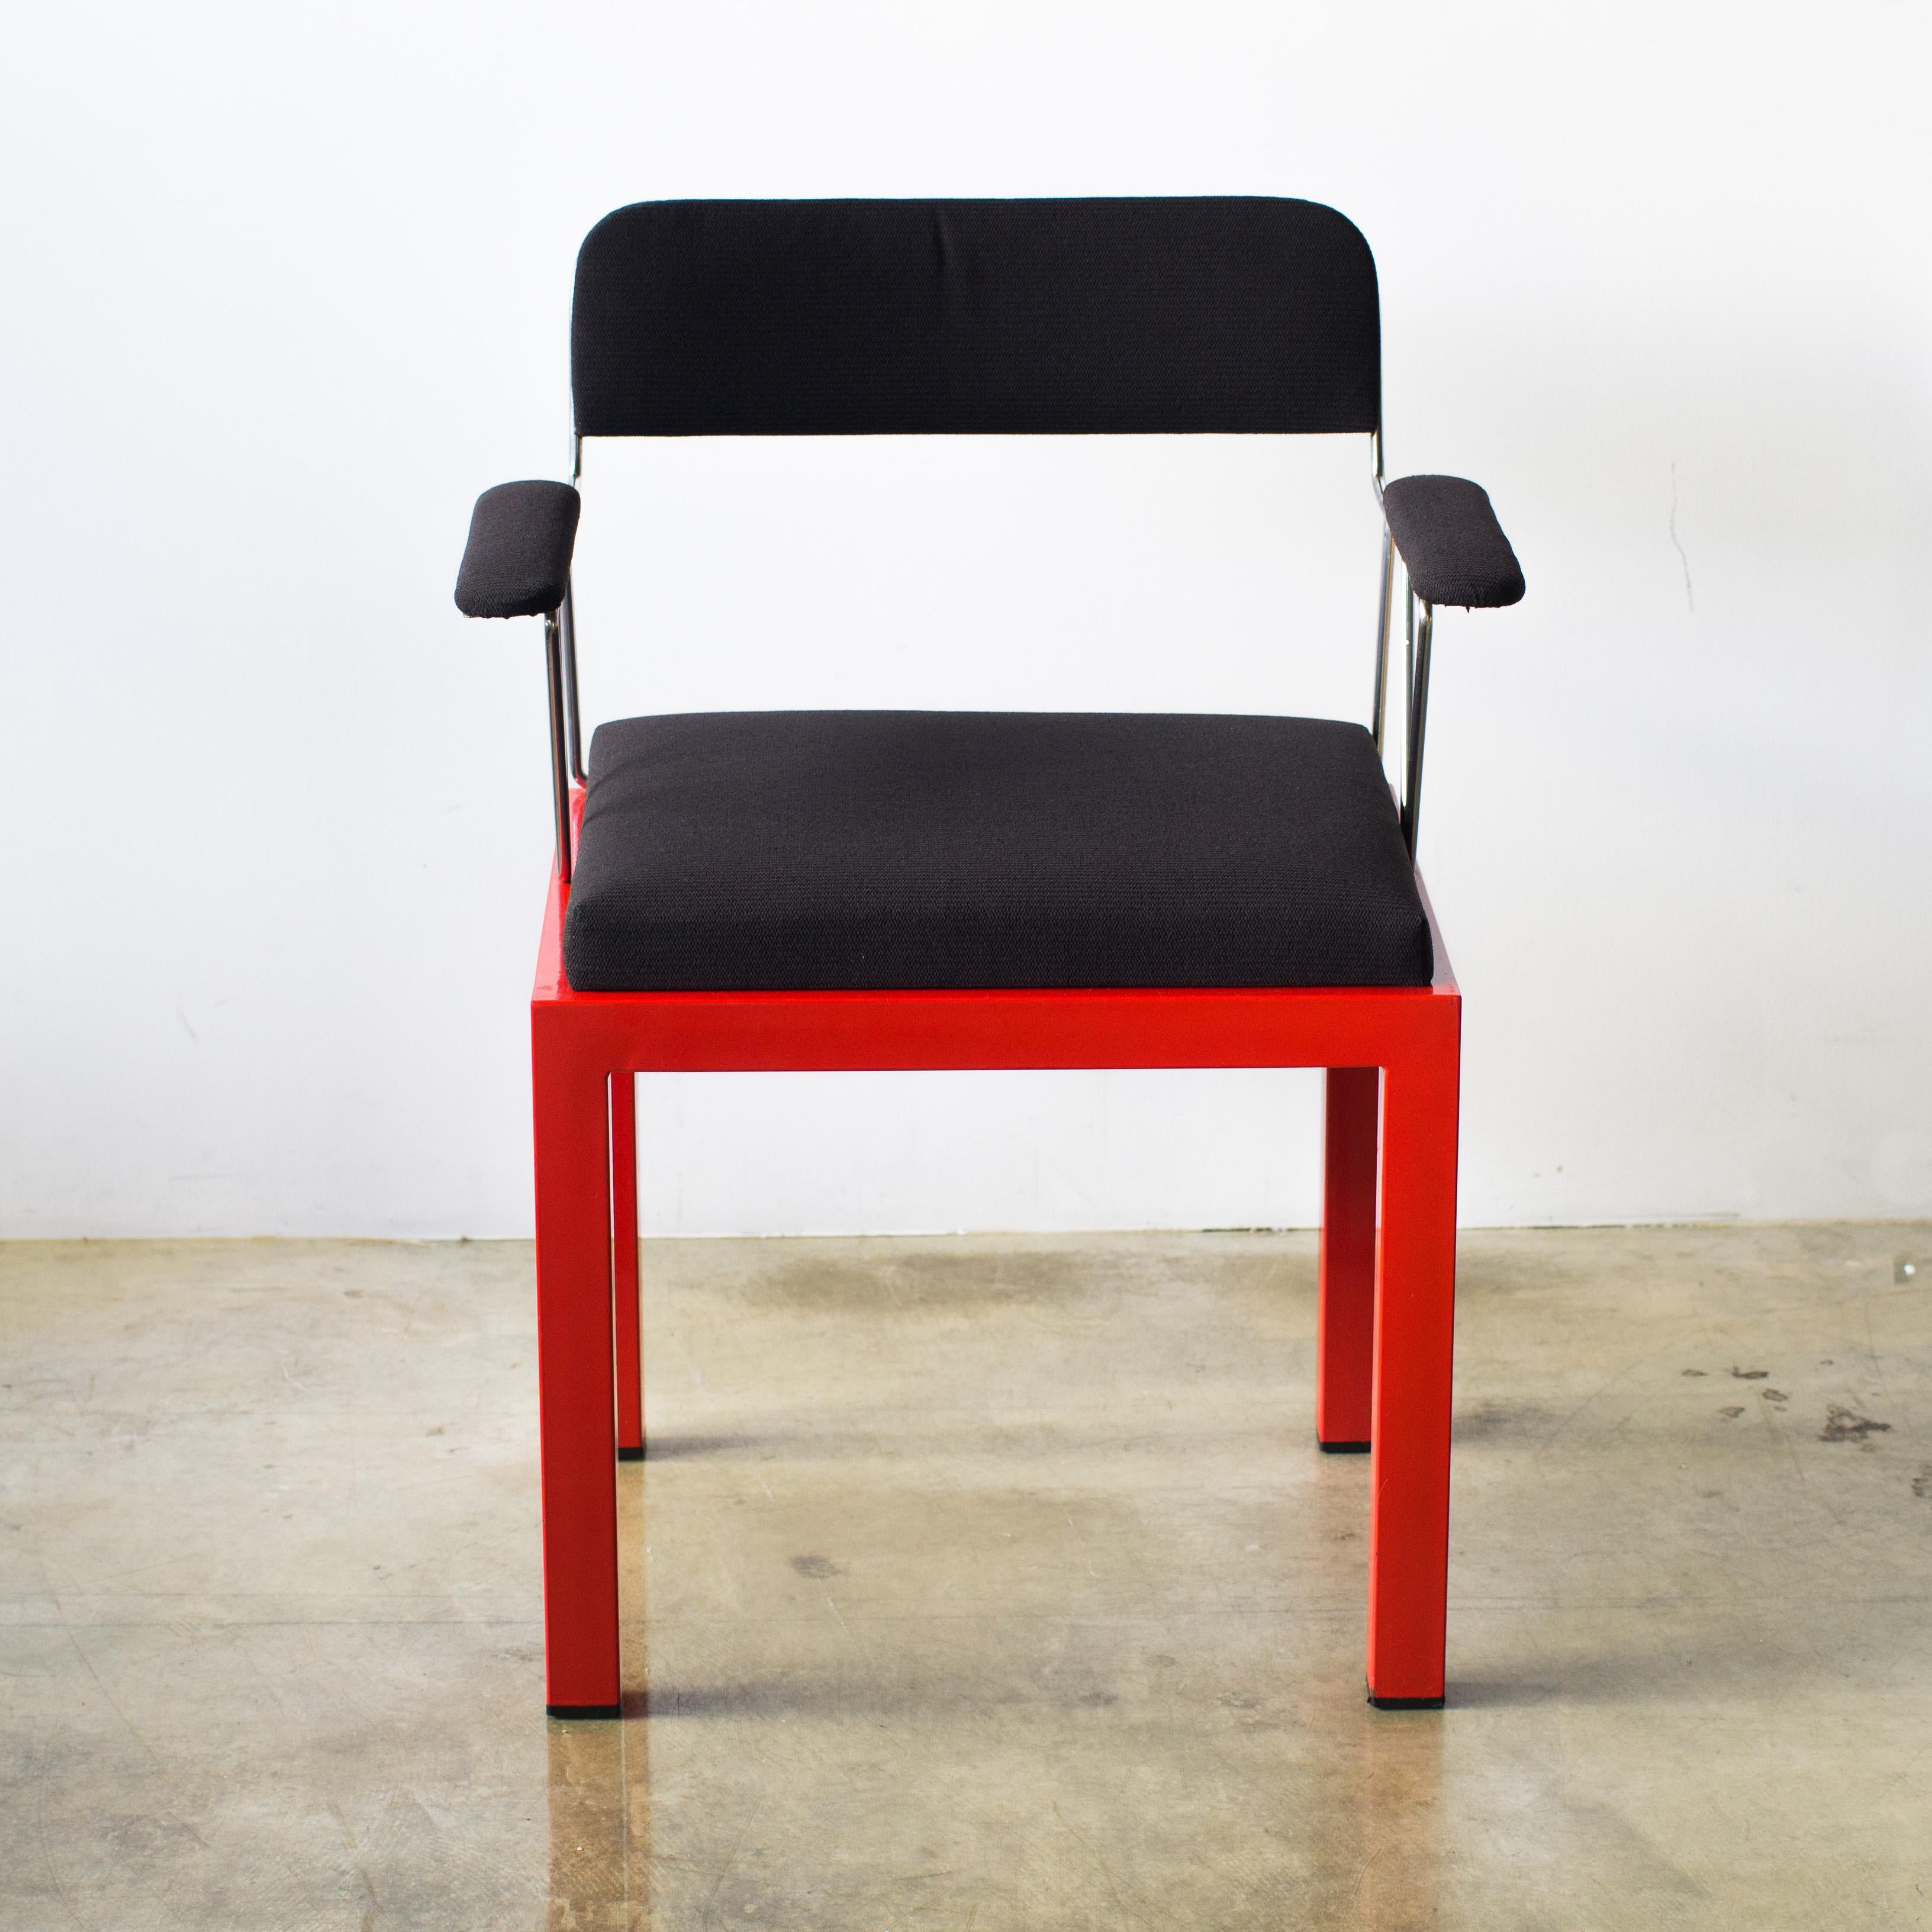 Lodge chair designed by Sottsass associates in 1986.
It was producing by Bieffeplast. No longer production.
 